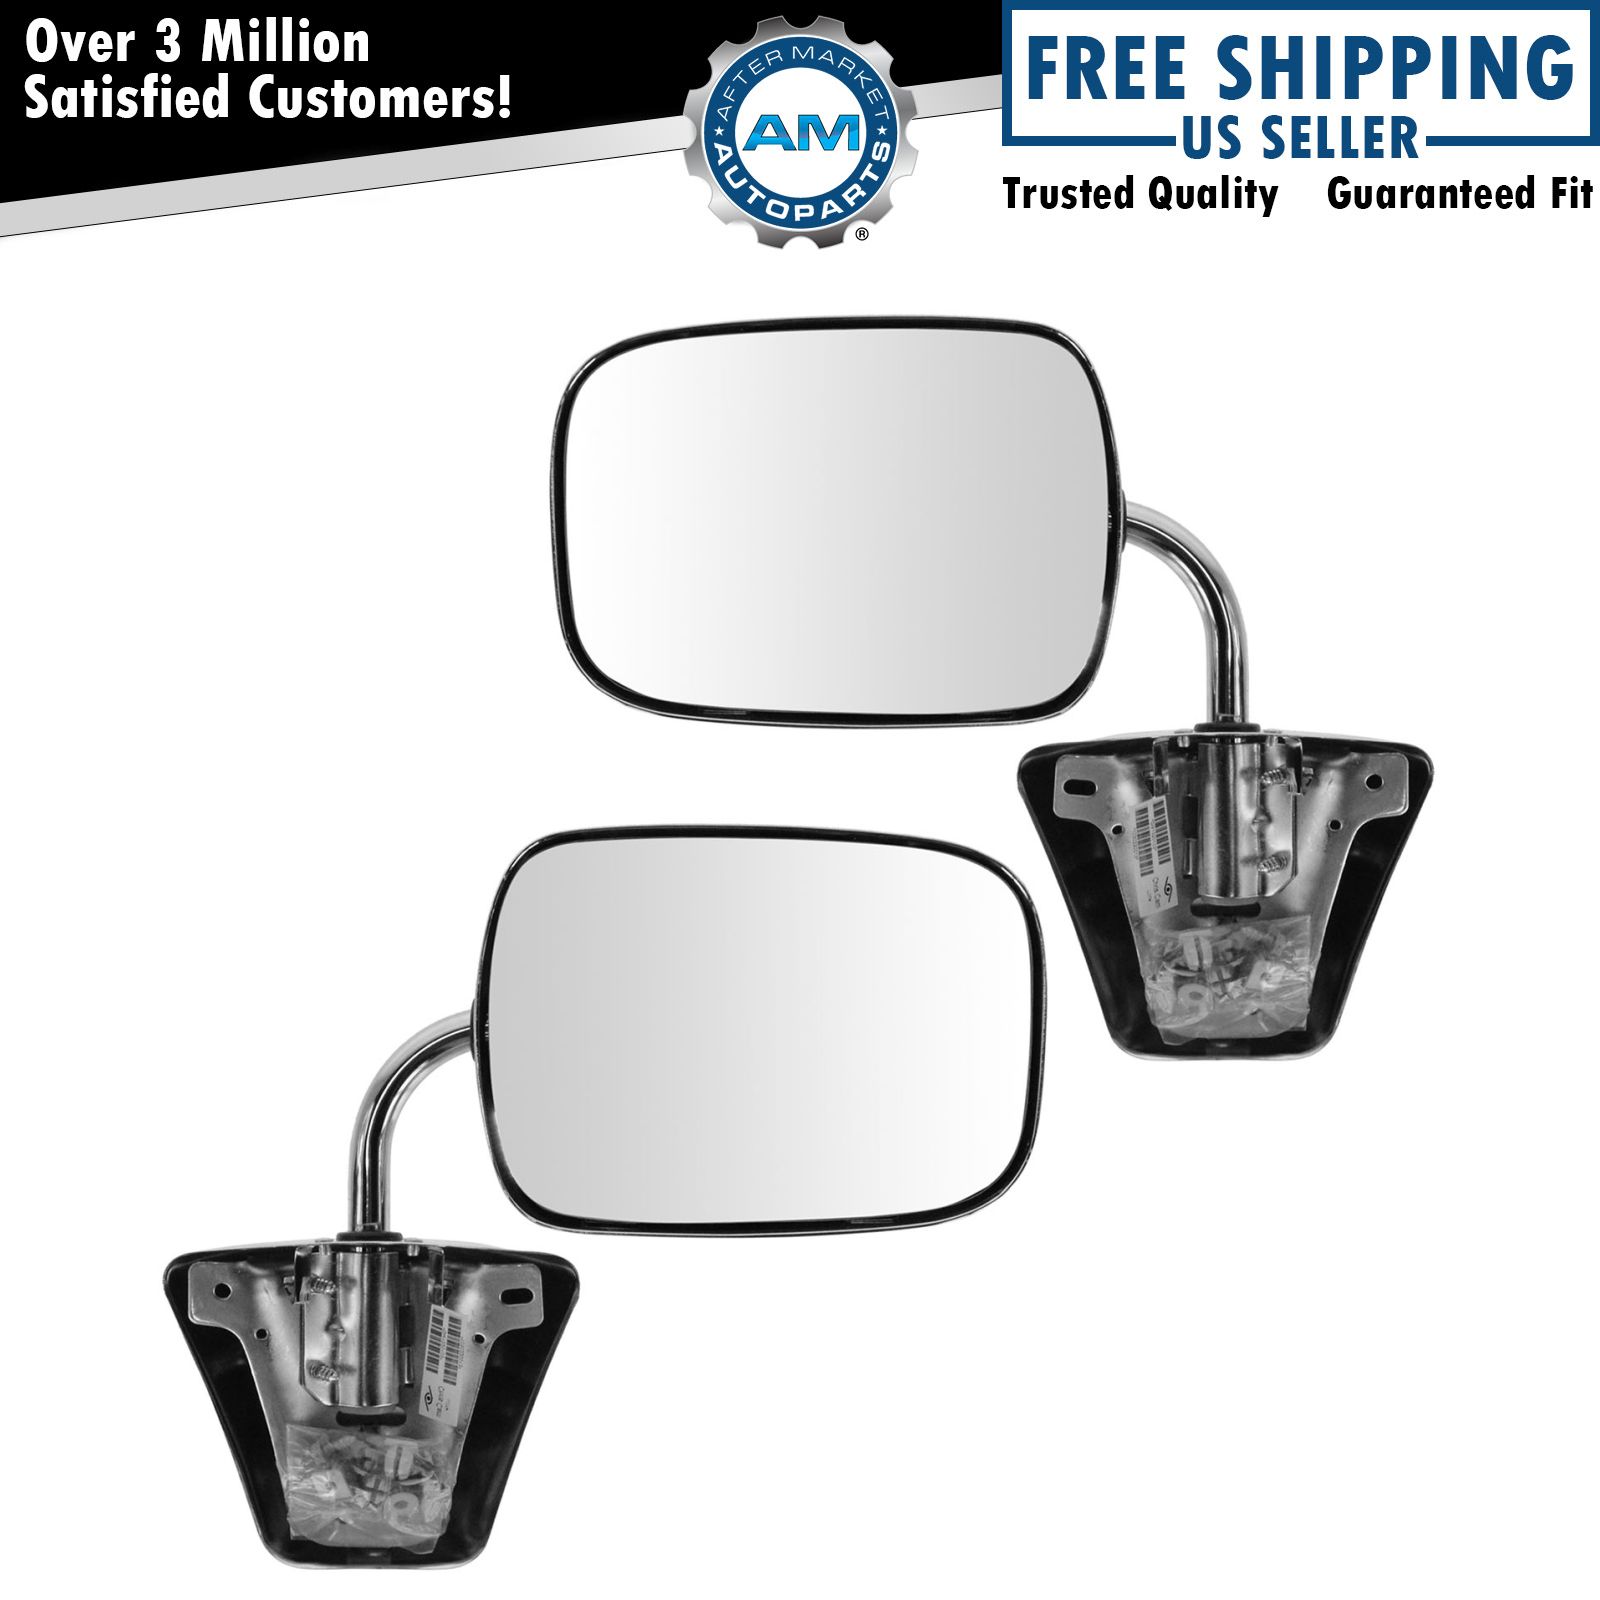 Chrome Manual Side View Mirrors Left LH & Right RH Pair Set for Pickup Truck